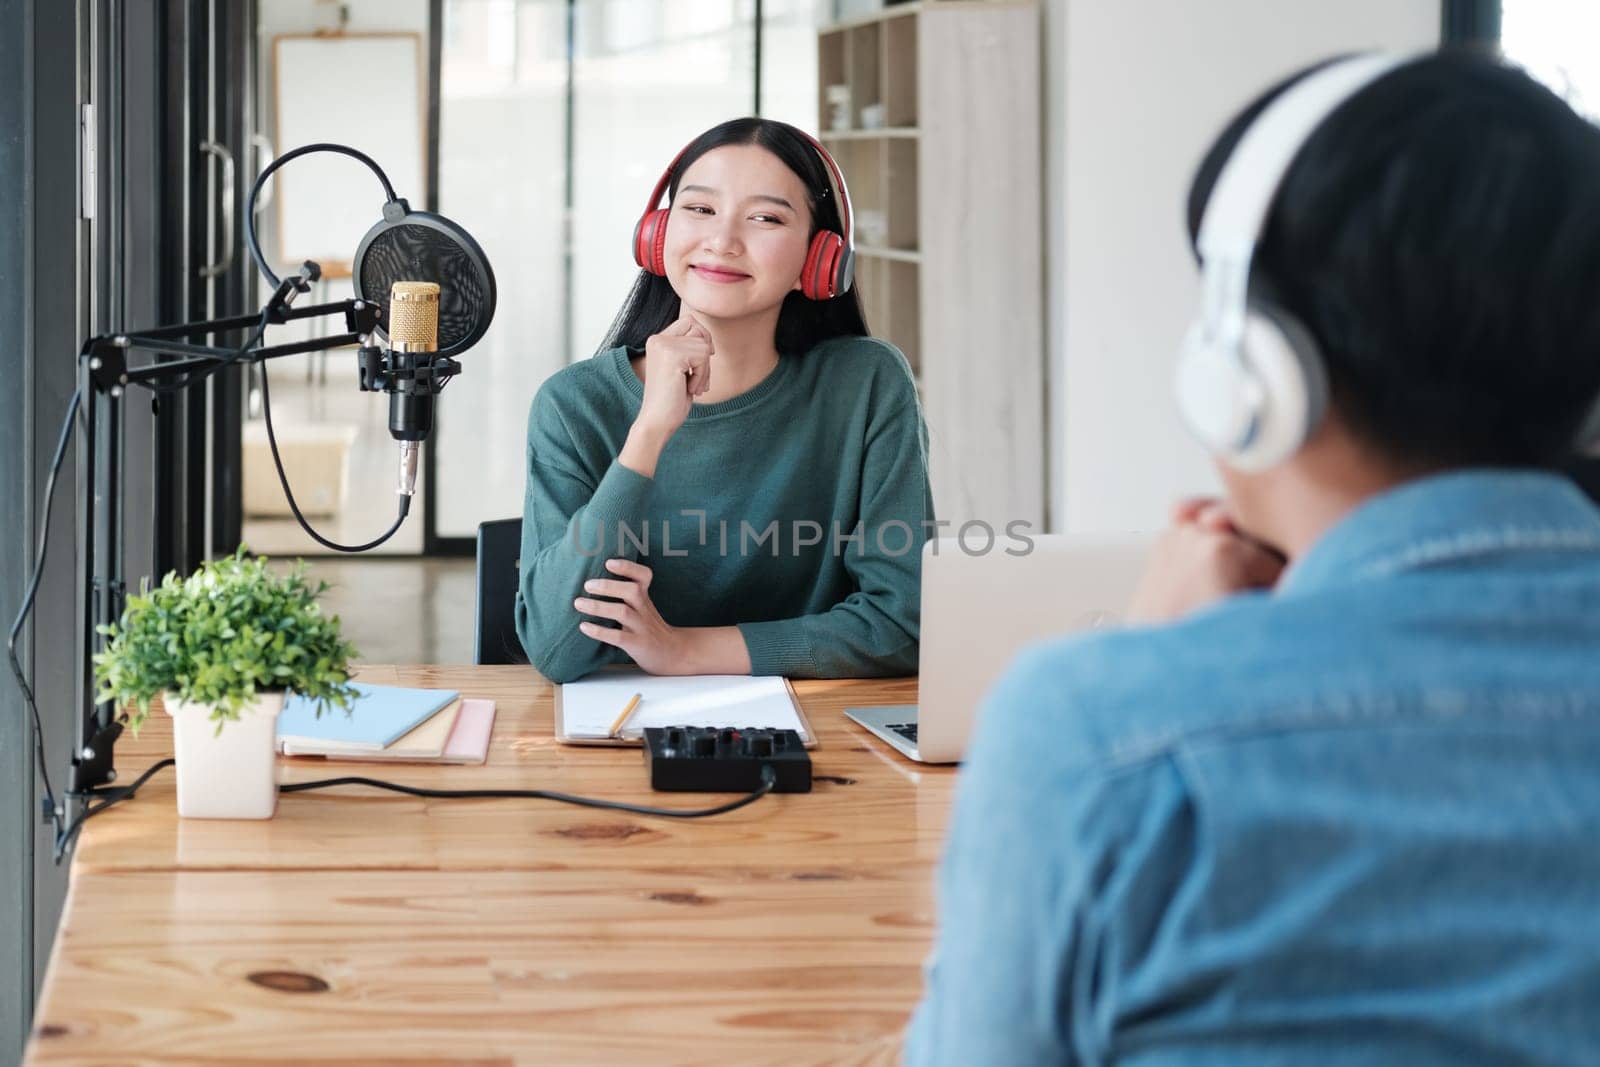 A woman is sitting at a desk with a microphone and a laptop. She is wearing headphones and smiling. The scene suggests a recording session or a podcast being produced